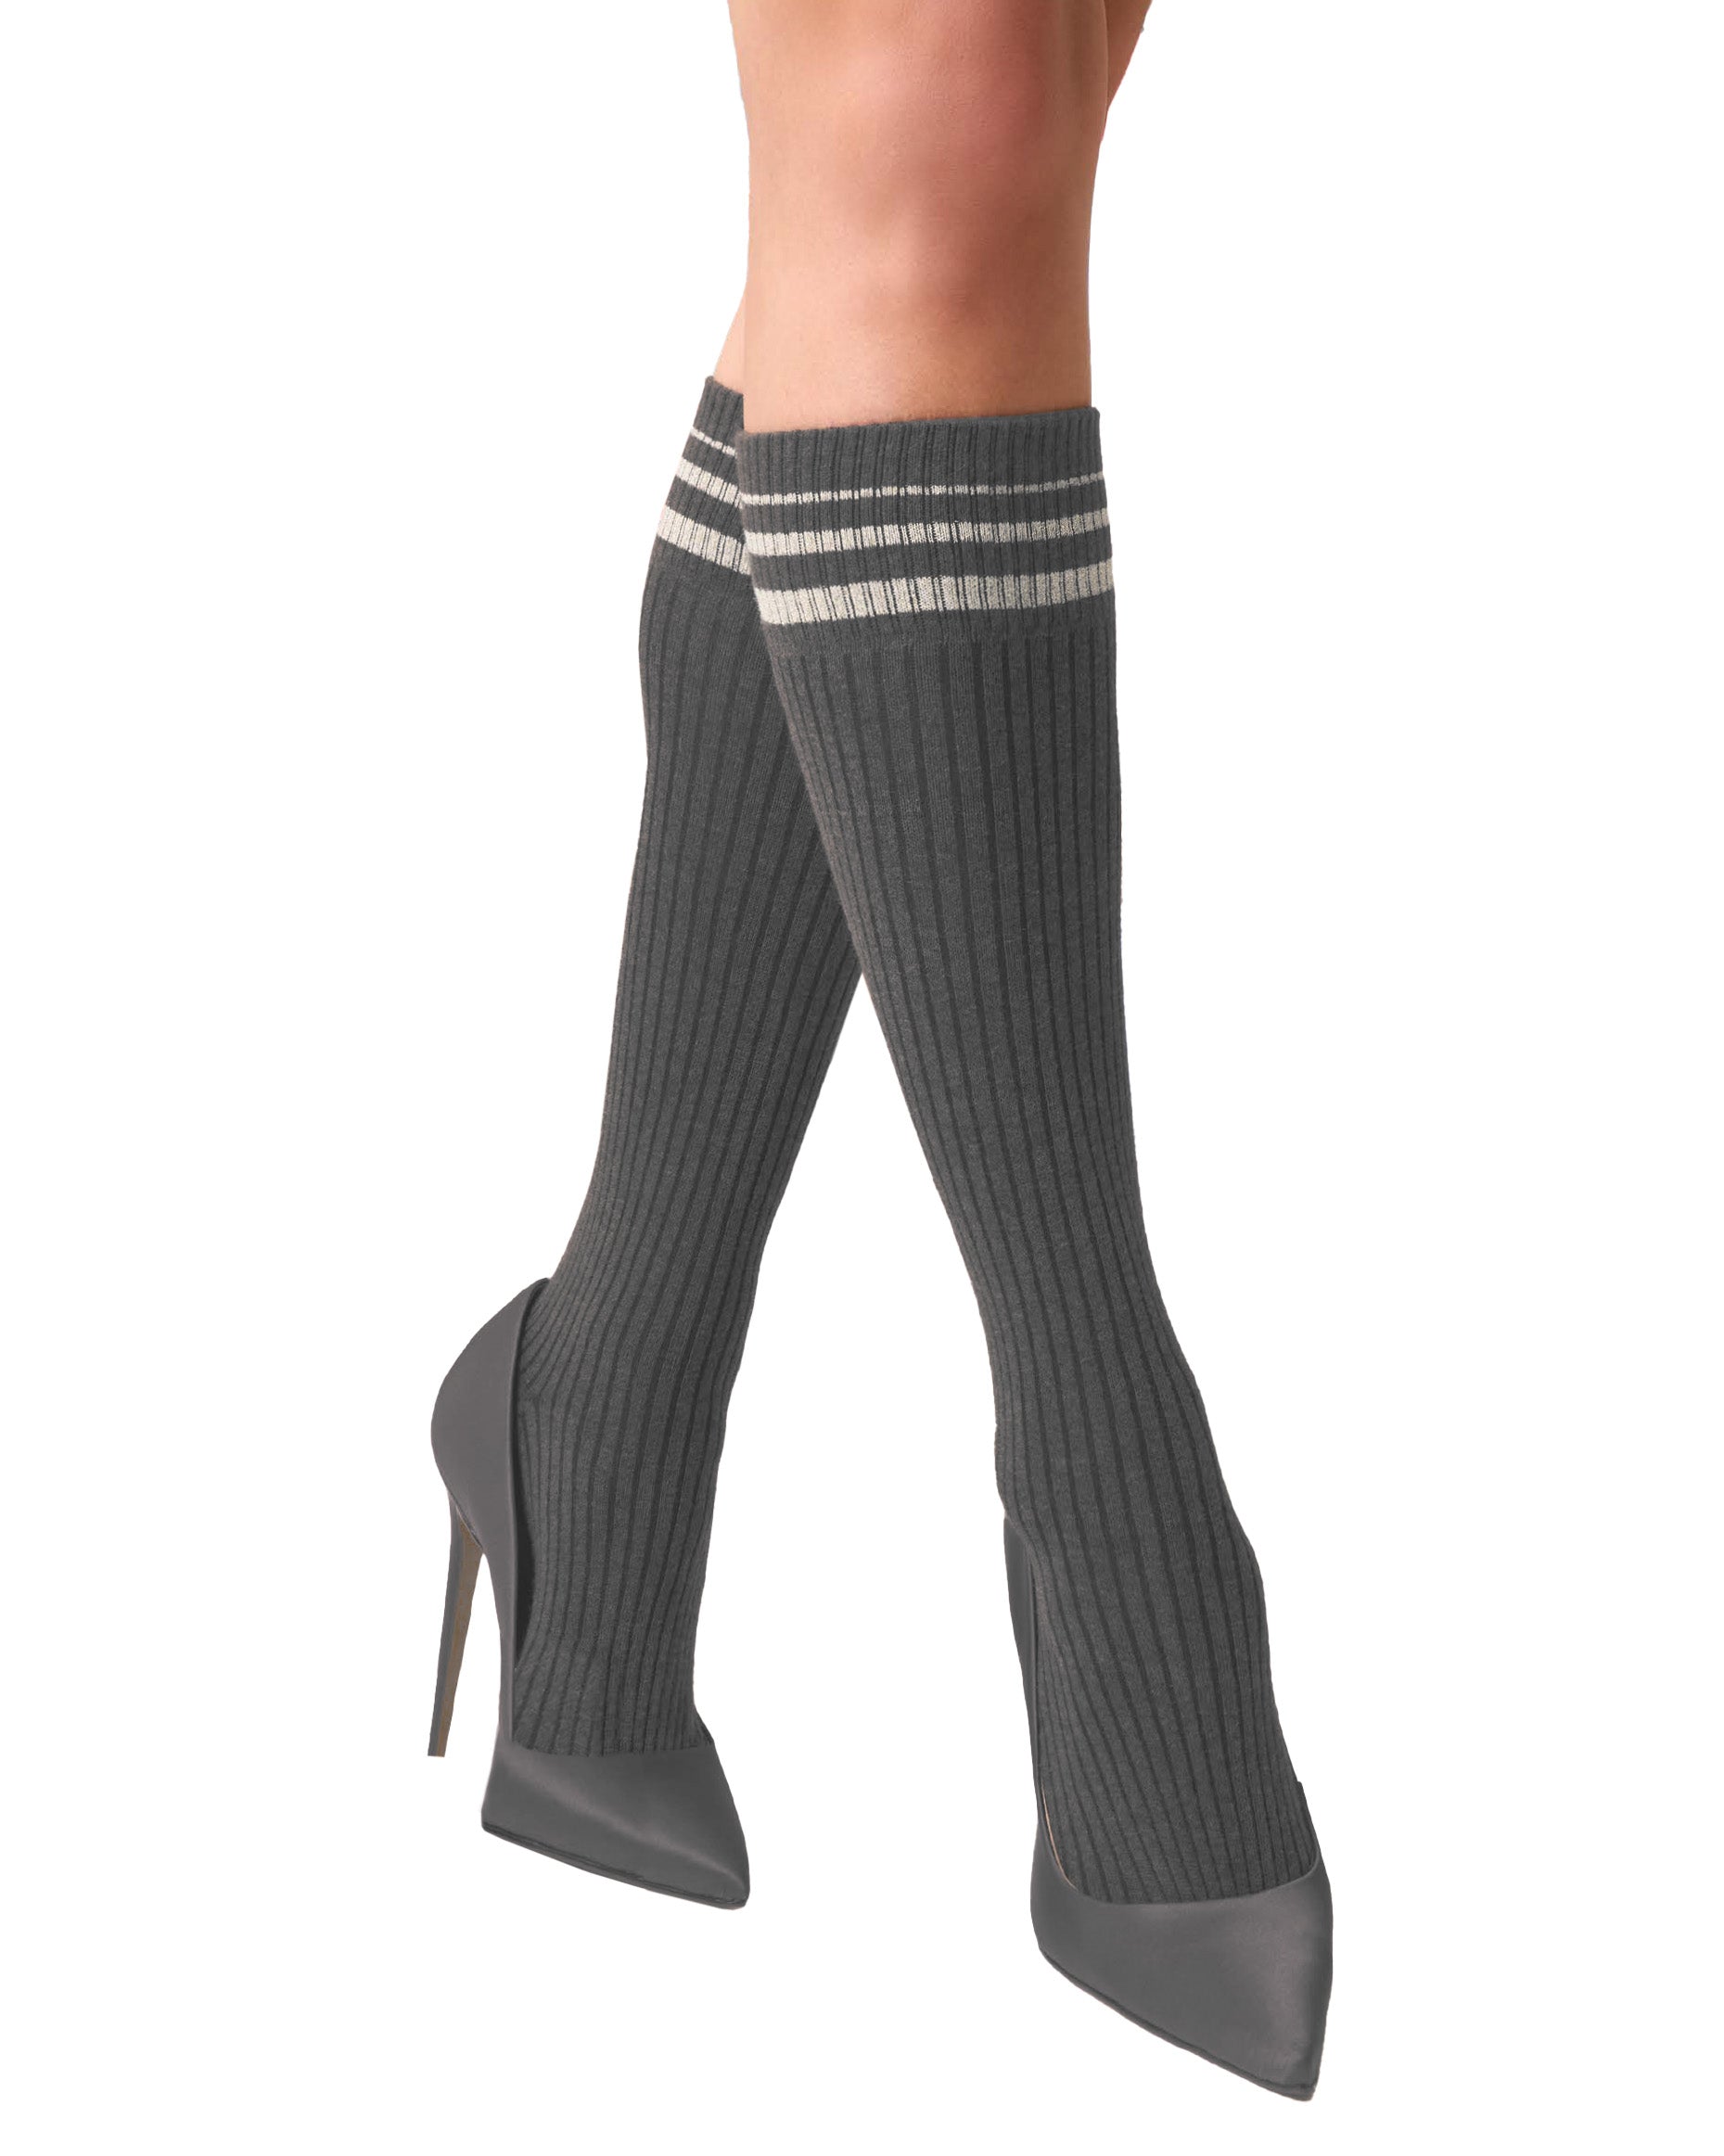 SiSi Pinstripe Gambaletto - Soft and warm dark grey cotton ribbed knee-high socks with deep comfort cuff with contrasting gold lamé stripes